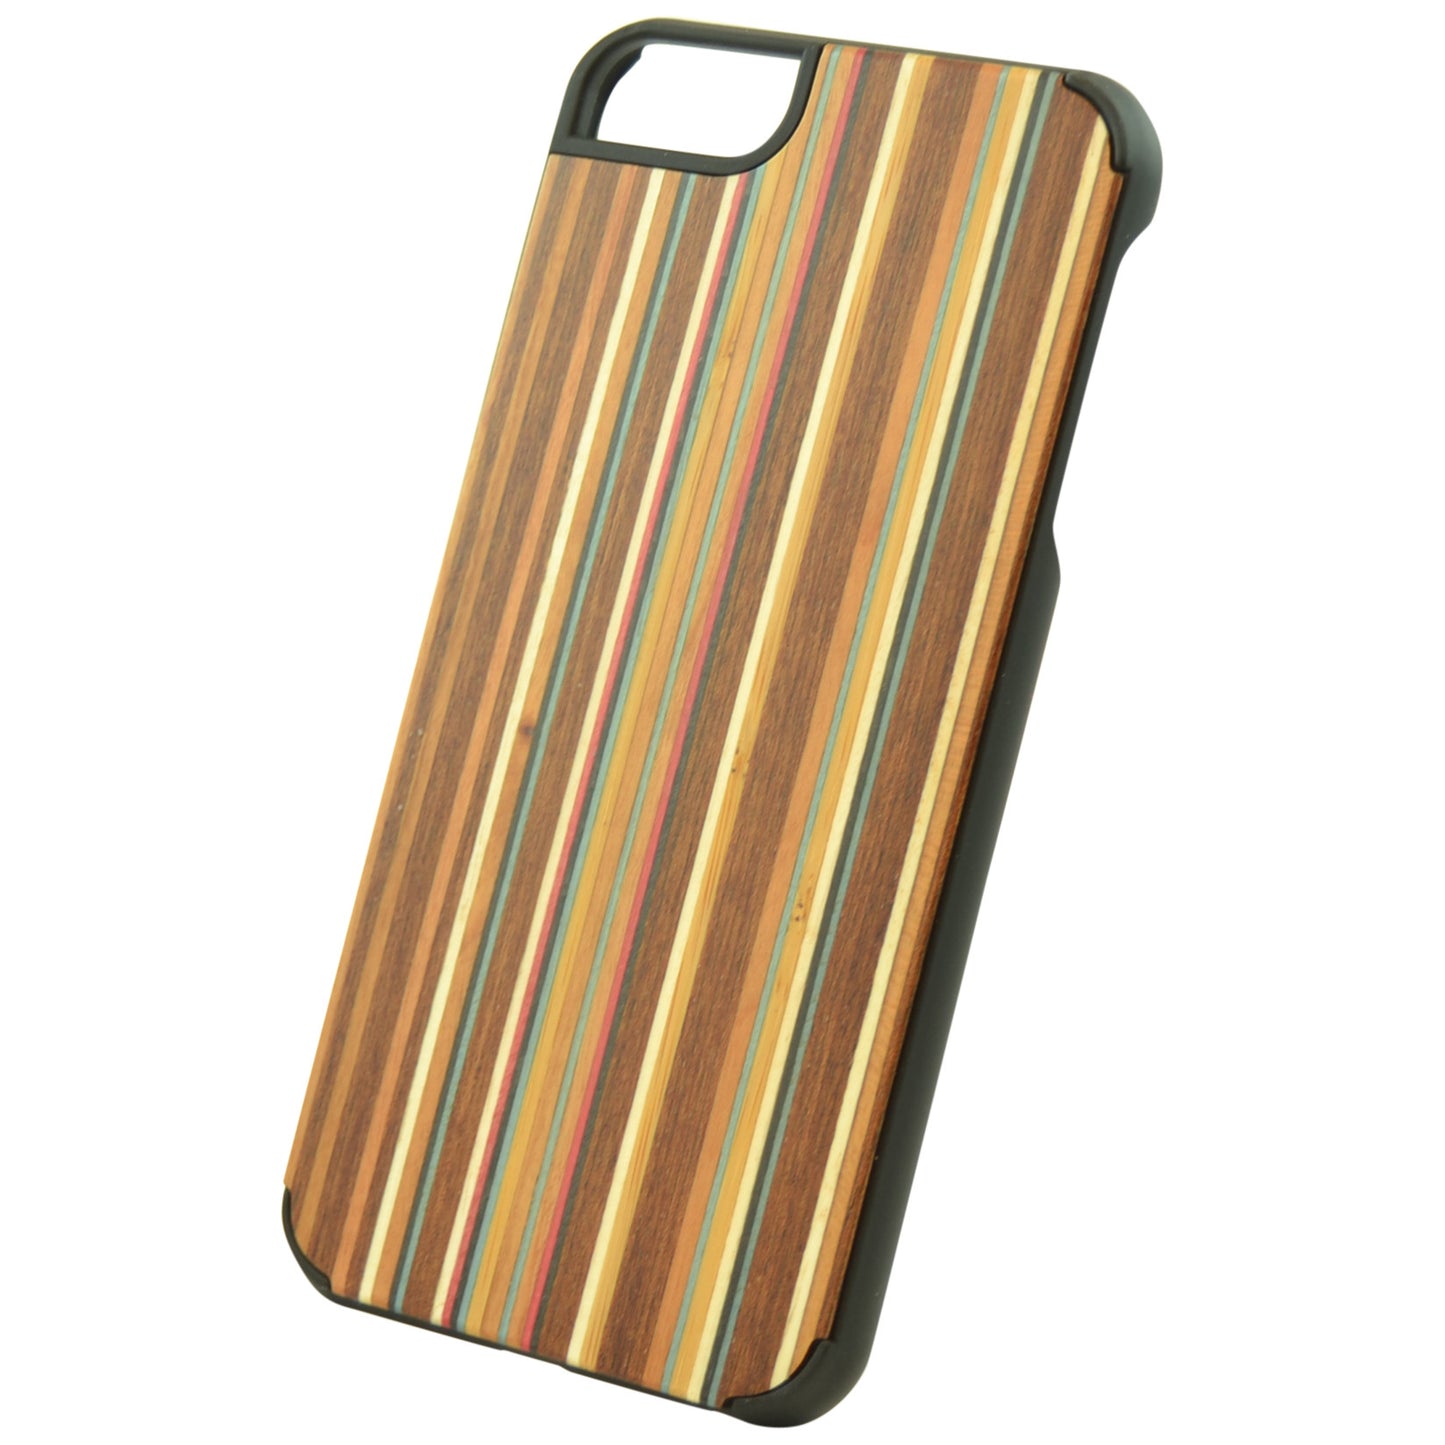 Wooden Case iPhone 6 Plus Striped Bamboo Protective Bumper Cover Mix